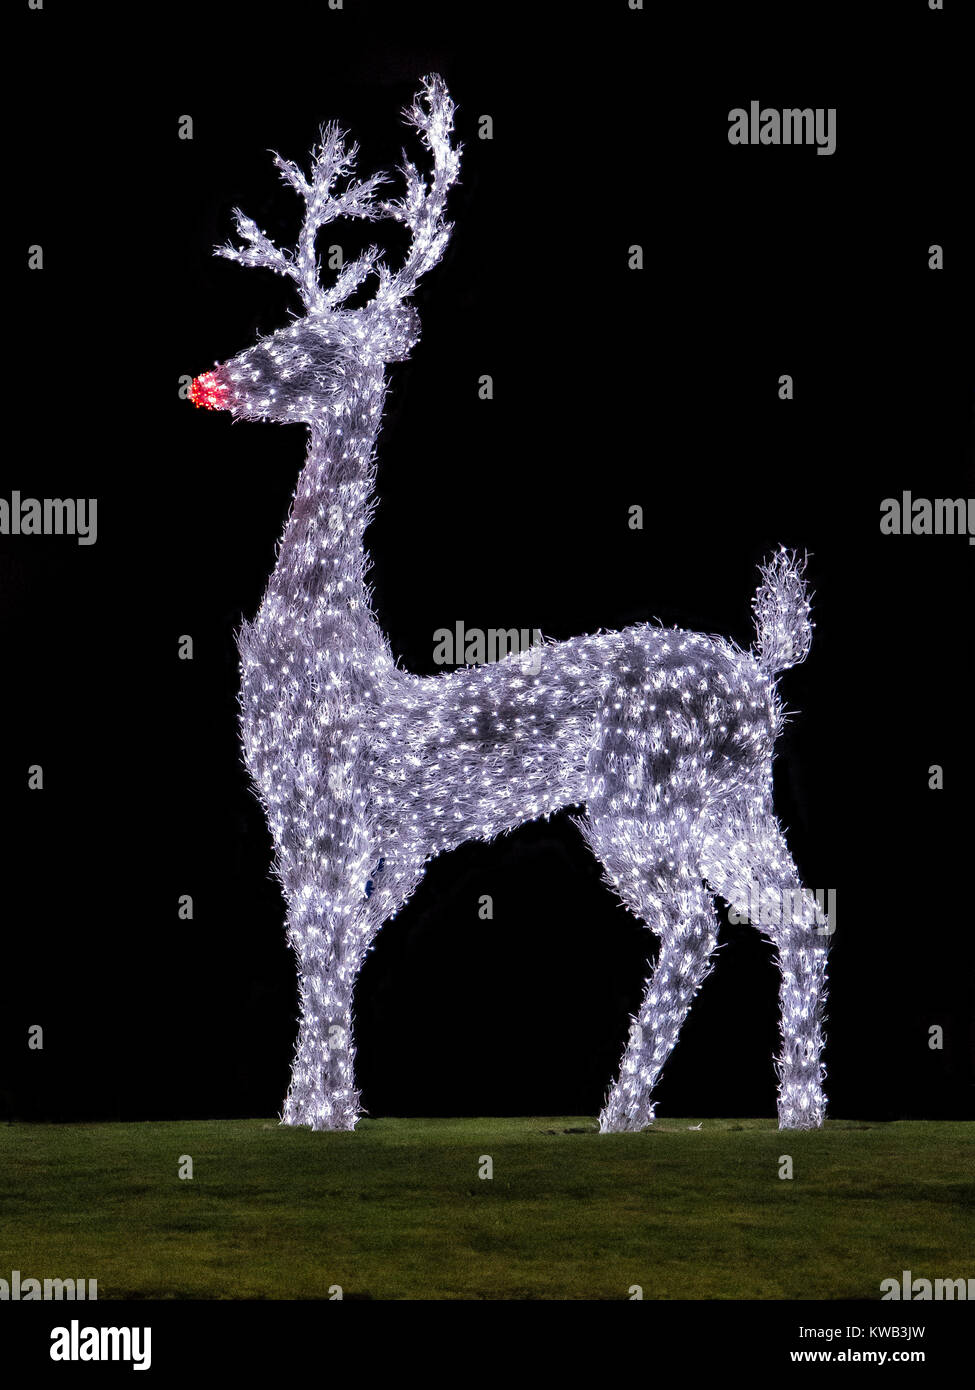 Blue Water Giant Christmas Reindeer structure Stock Photo